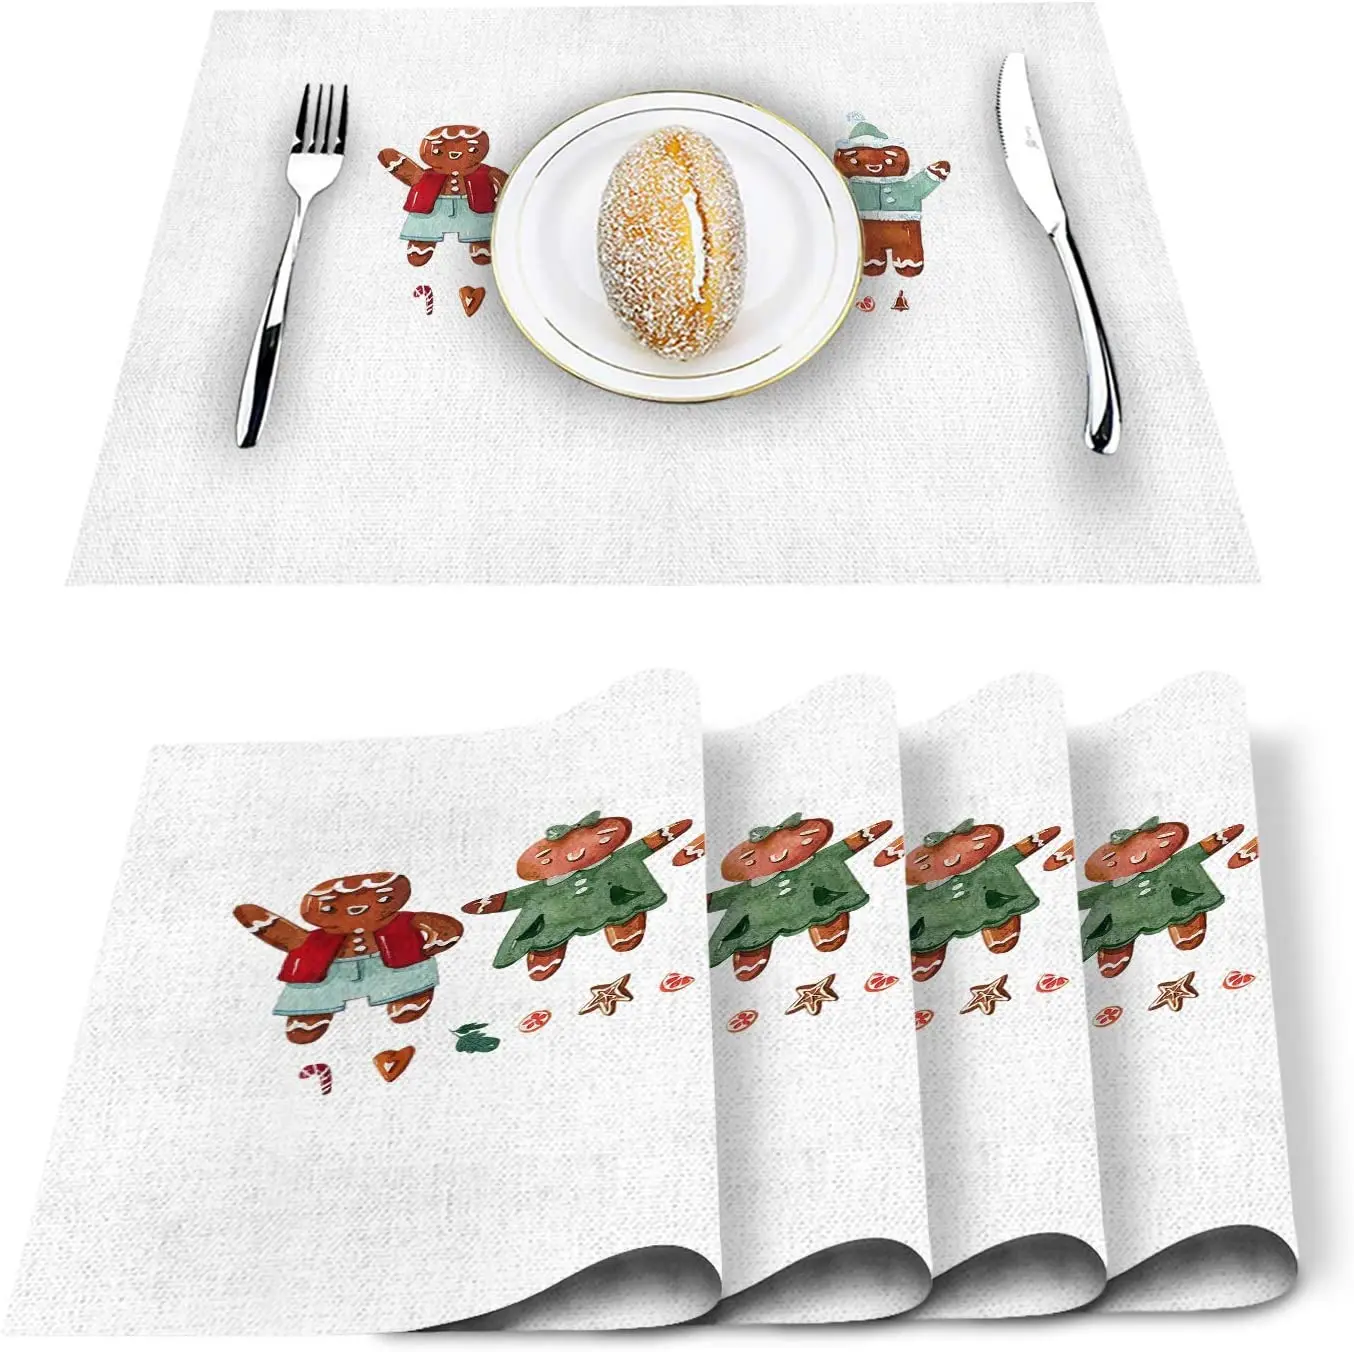 

Christmas Placemats Set of 4 Merry Christmas Place Mats Gingerbread Men Heat Resistant Washable Kitchen Tablemats